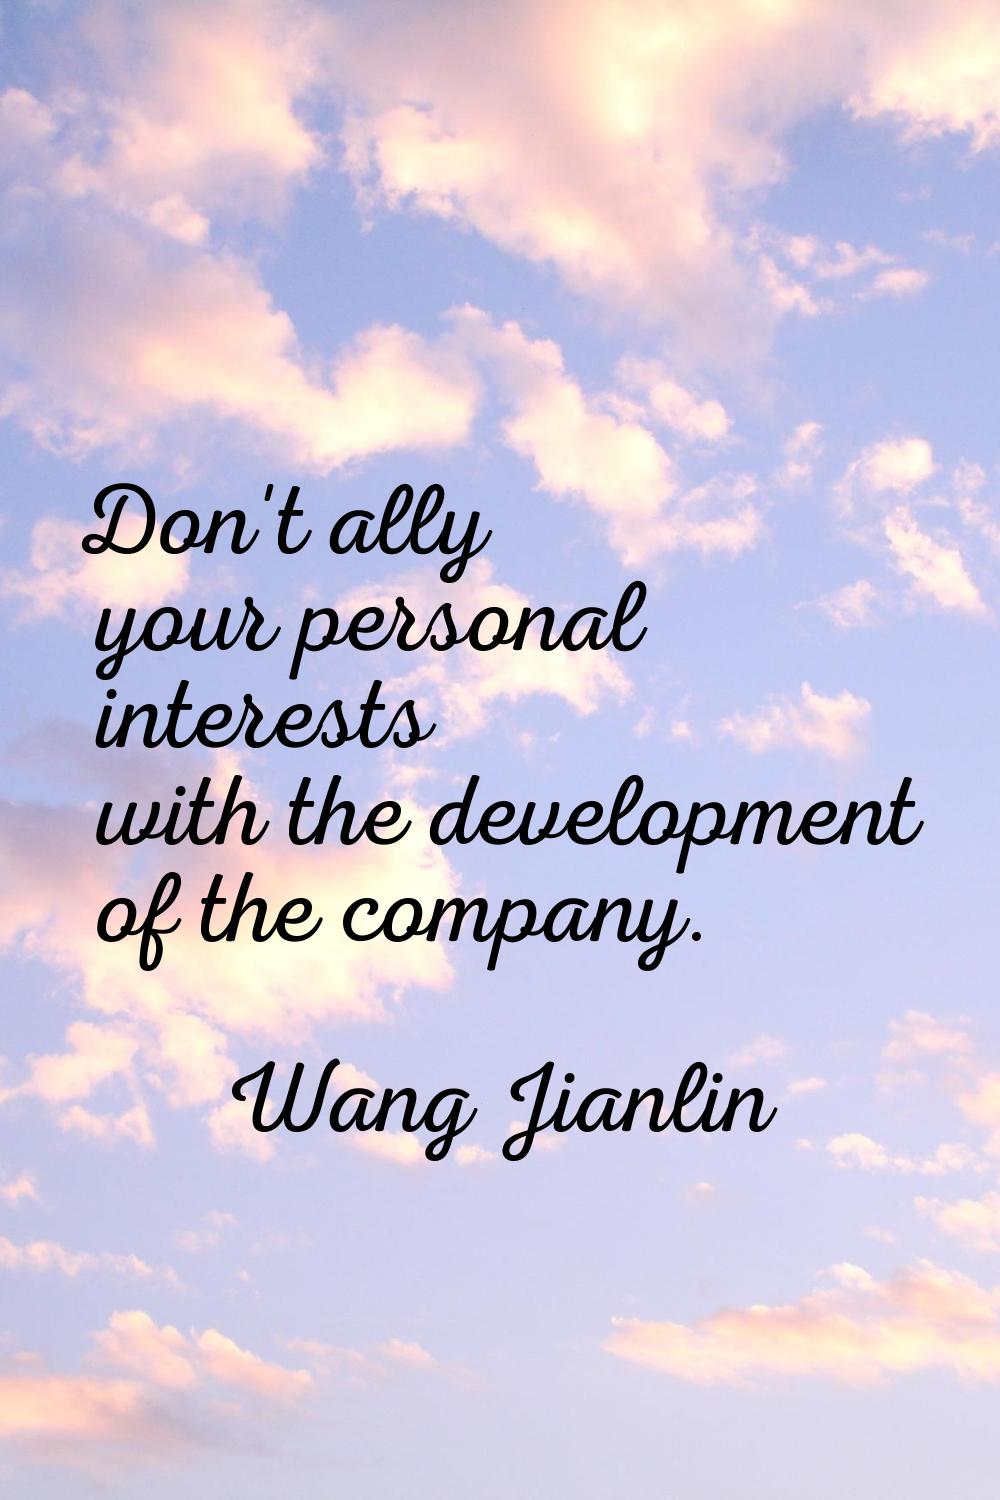 Don't ally your personal interests with the development of the company.